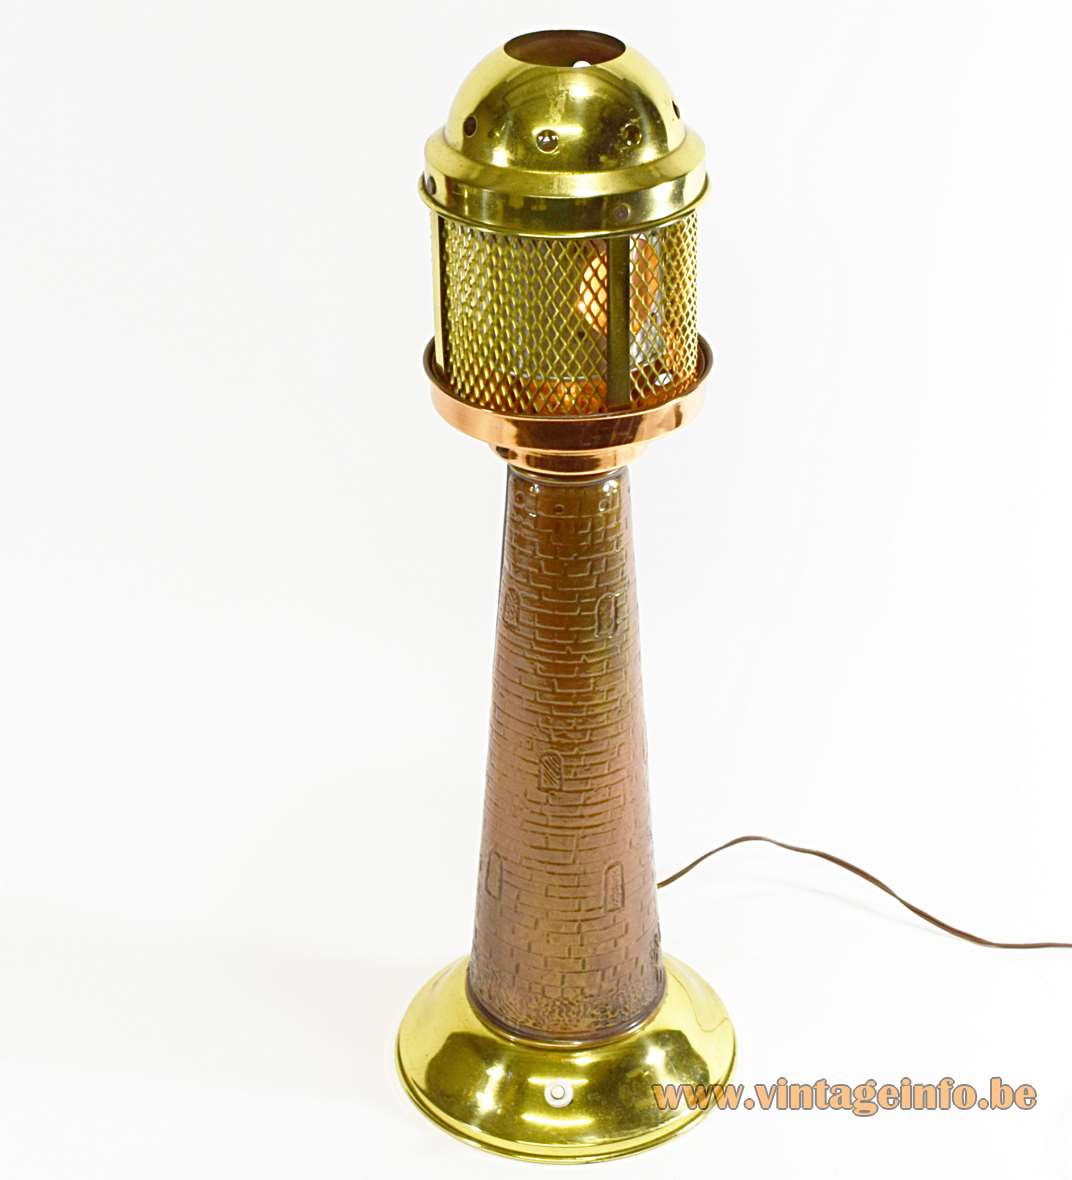 Lighthouse table lamp round copper & brass base grid lampshade tower coastal tourist souvenir France 1950s 1960s